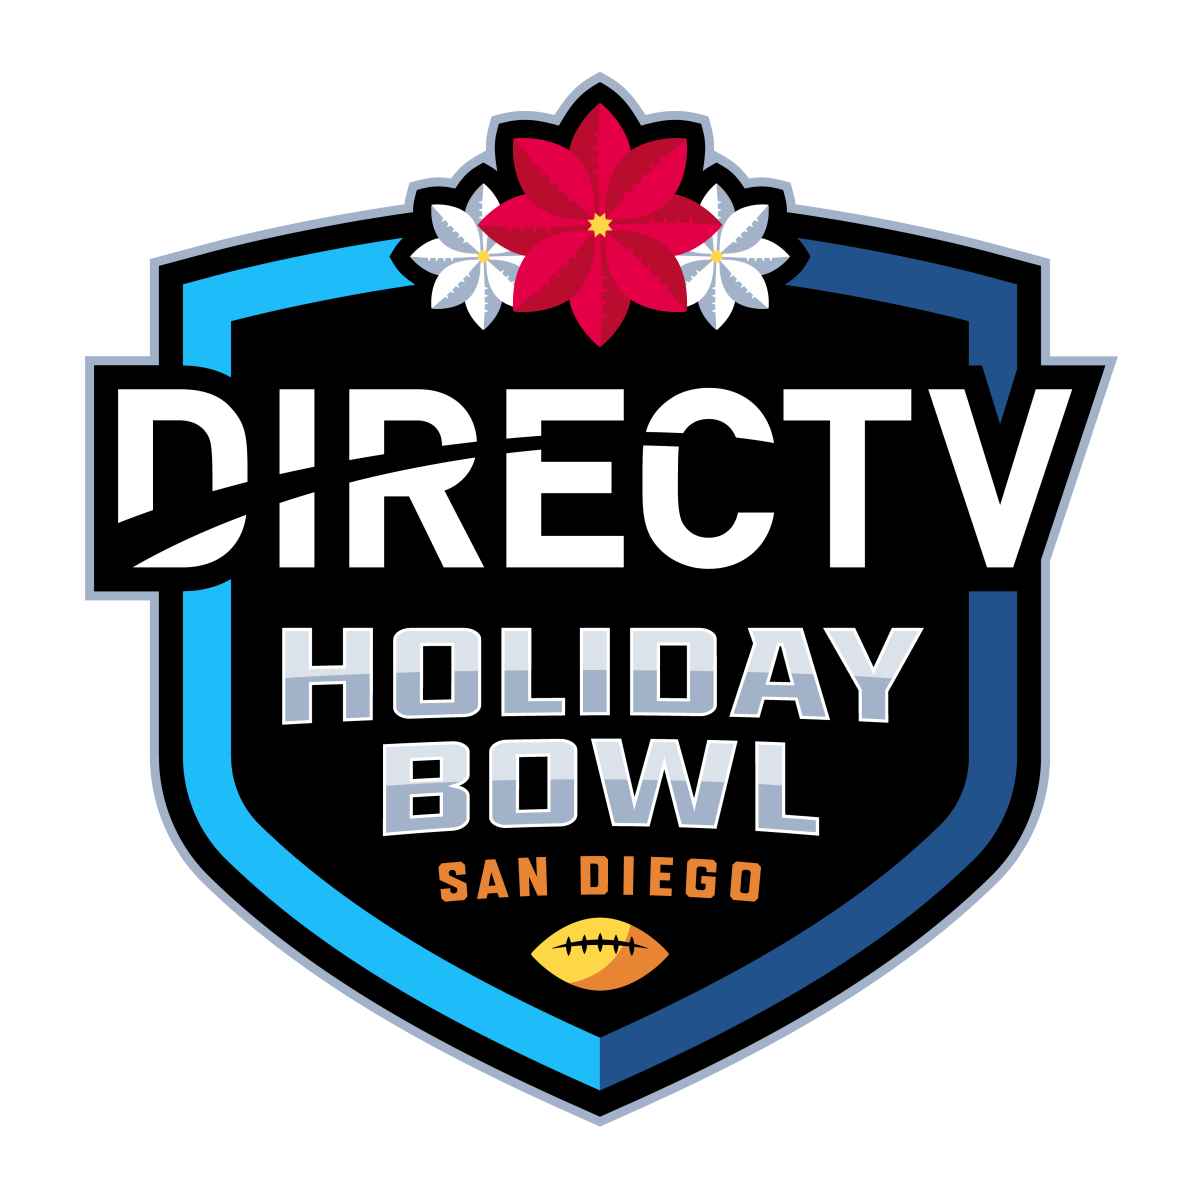 Holiday Bowl lands DirecTV as its new title sponsor The San Diego